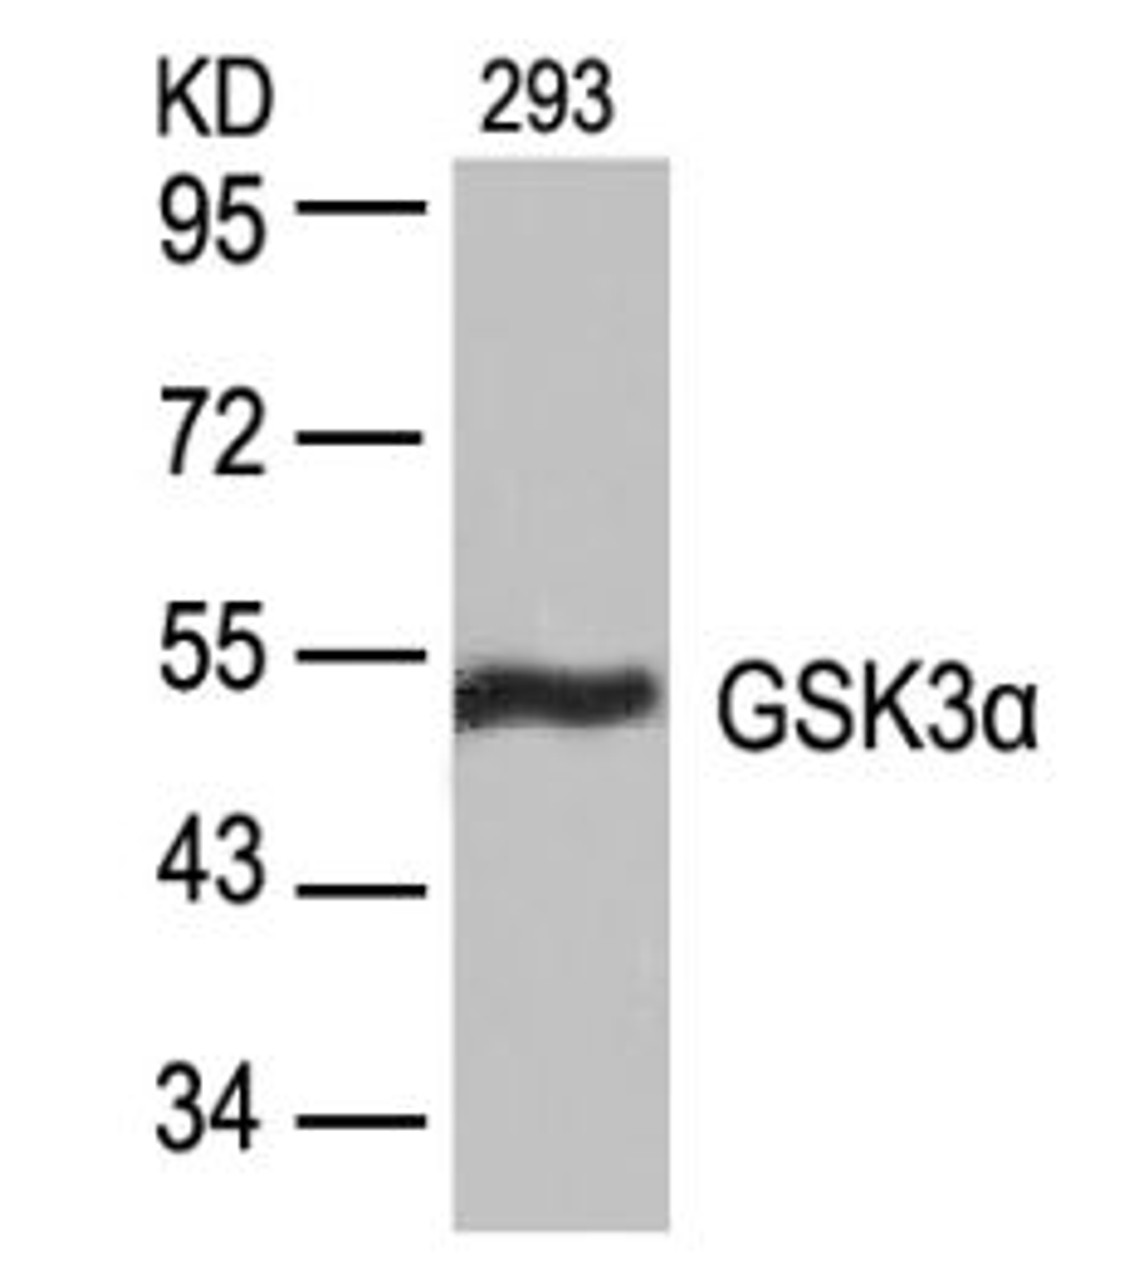 Western blot analysis of lysed extracts from 293 cells using GSK3&#945; (Ab-21) .